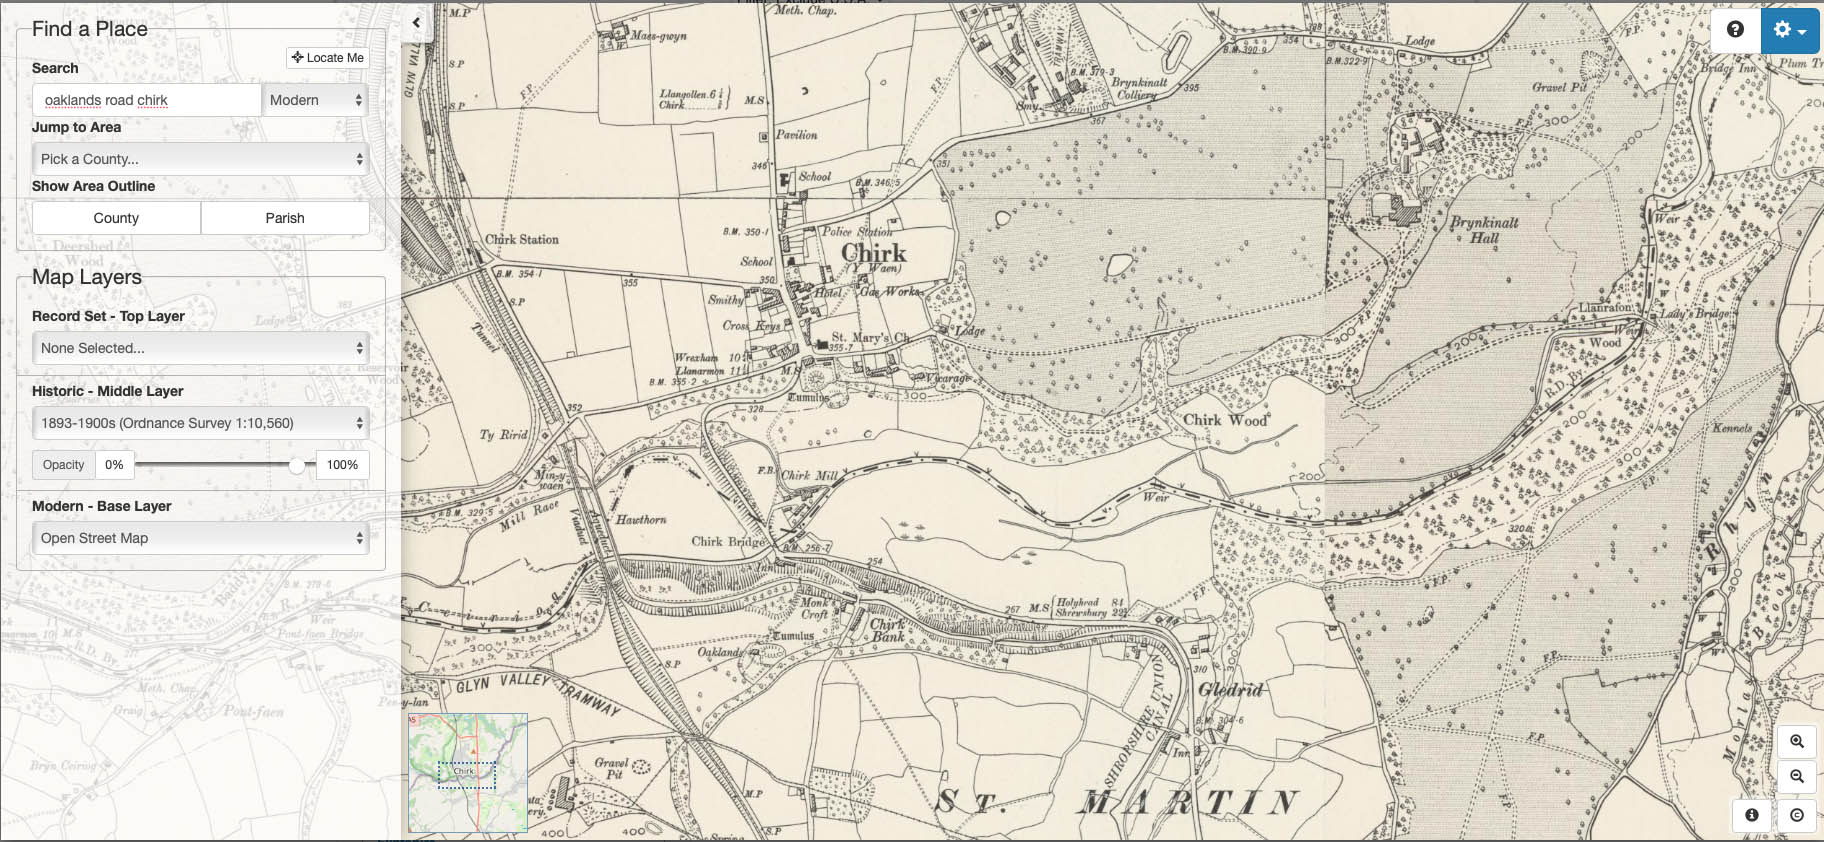 TheGenealogist's Map Explorer helps us find the colliery where Albert Lockley worked